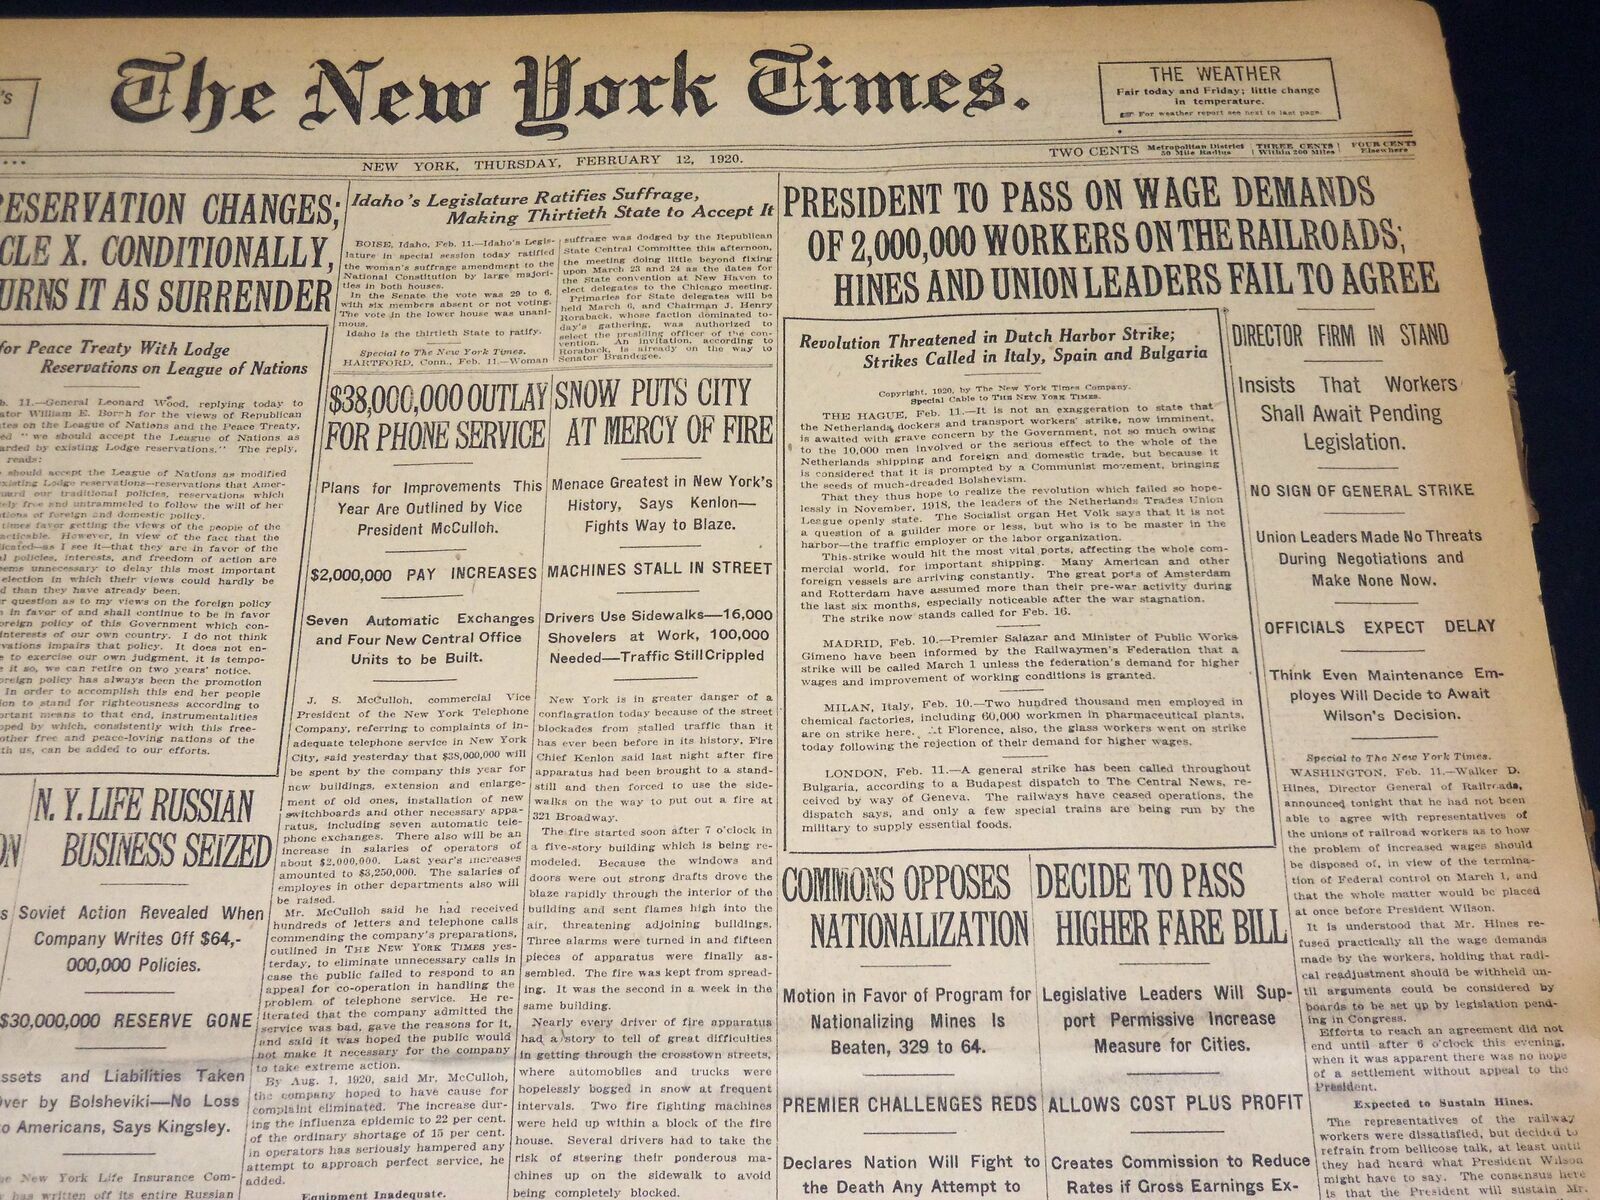 1920 FEBRUARY 12 NEW YORK TIMES - PRESIDENT TO PASS ON WAGE DEMANDS - NT 7868